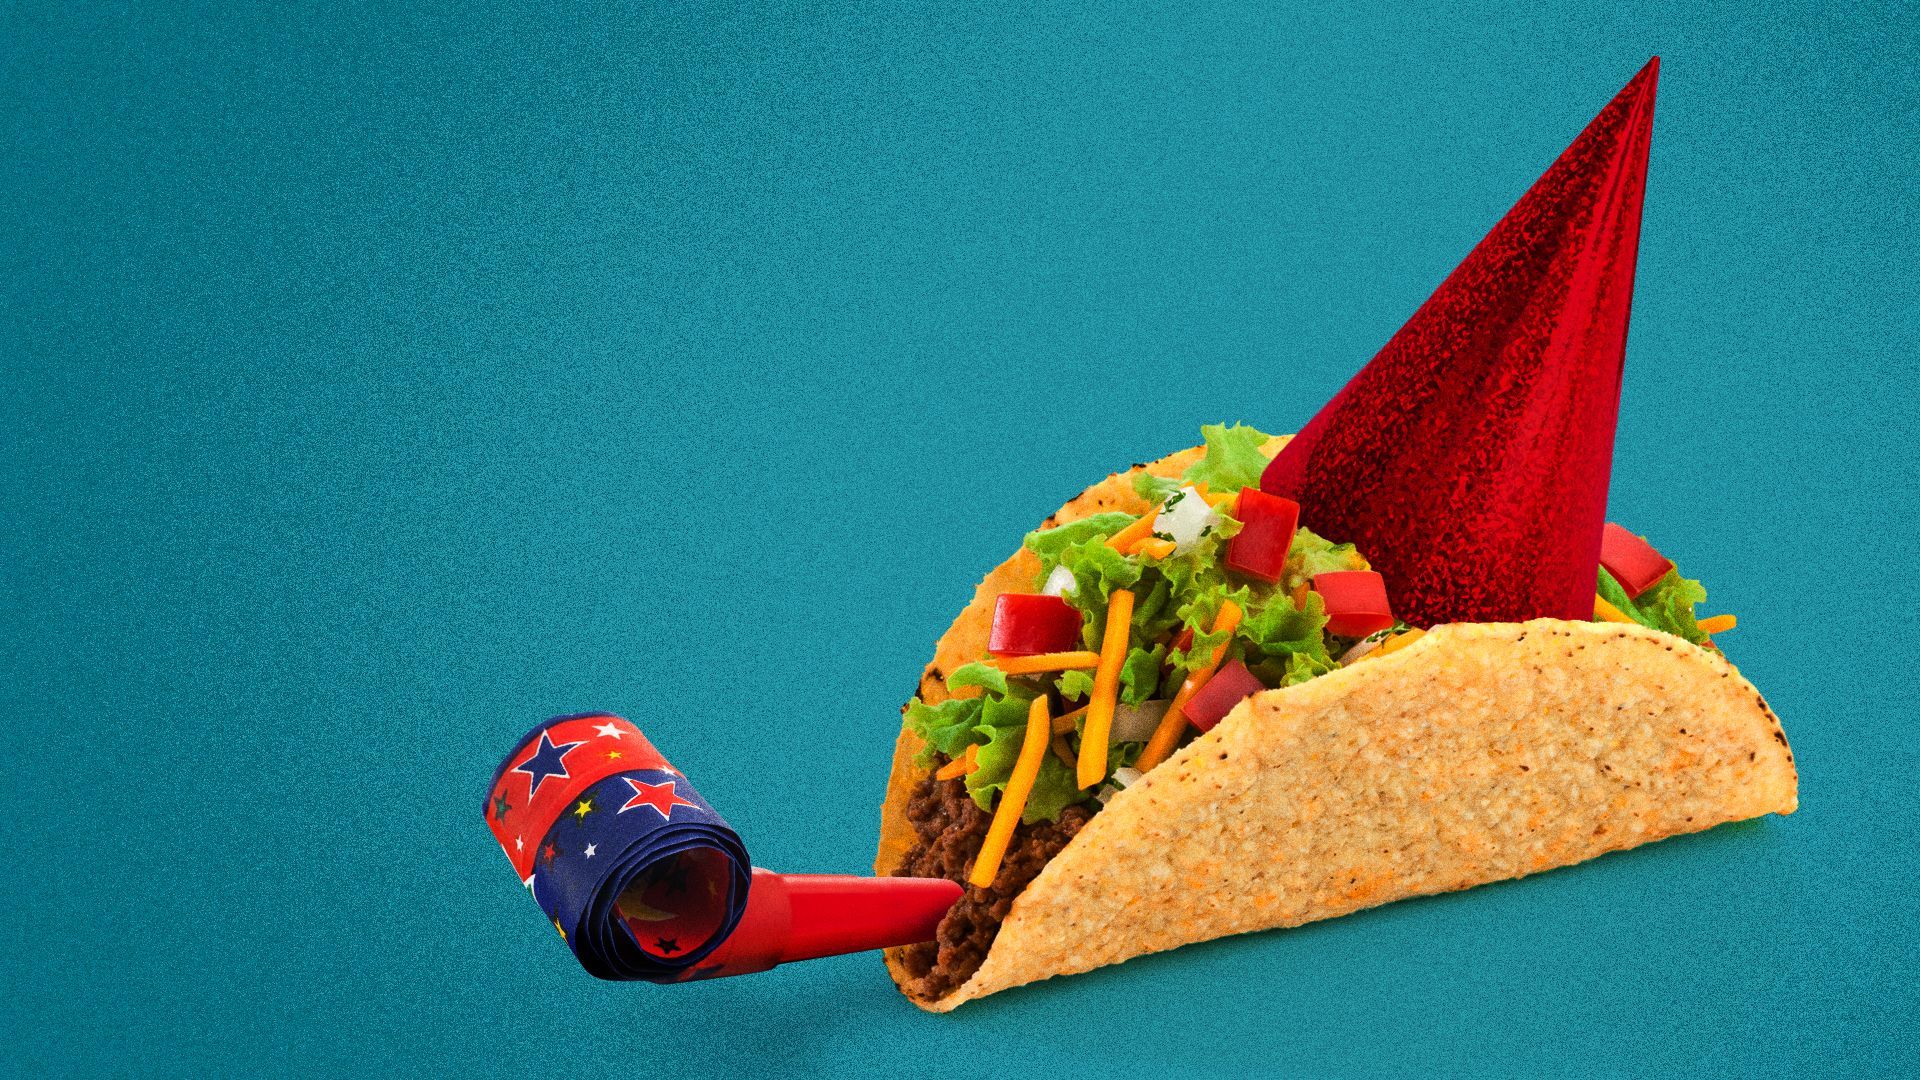 Illustration of a taco wearing a party hat and blowing a party horn. 